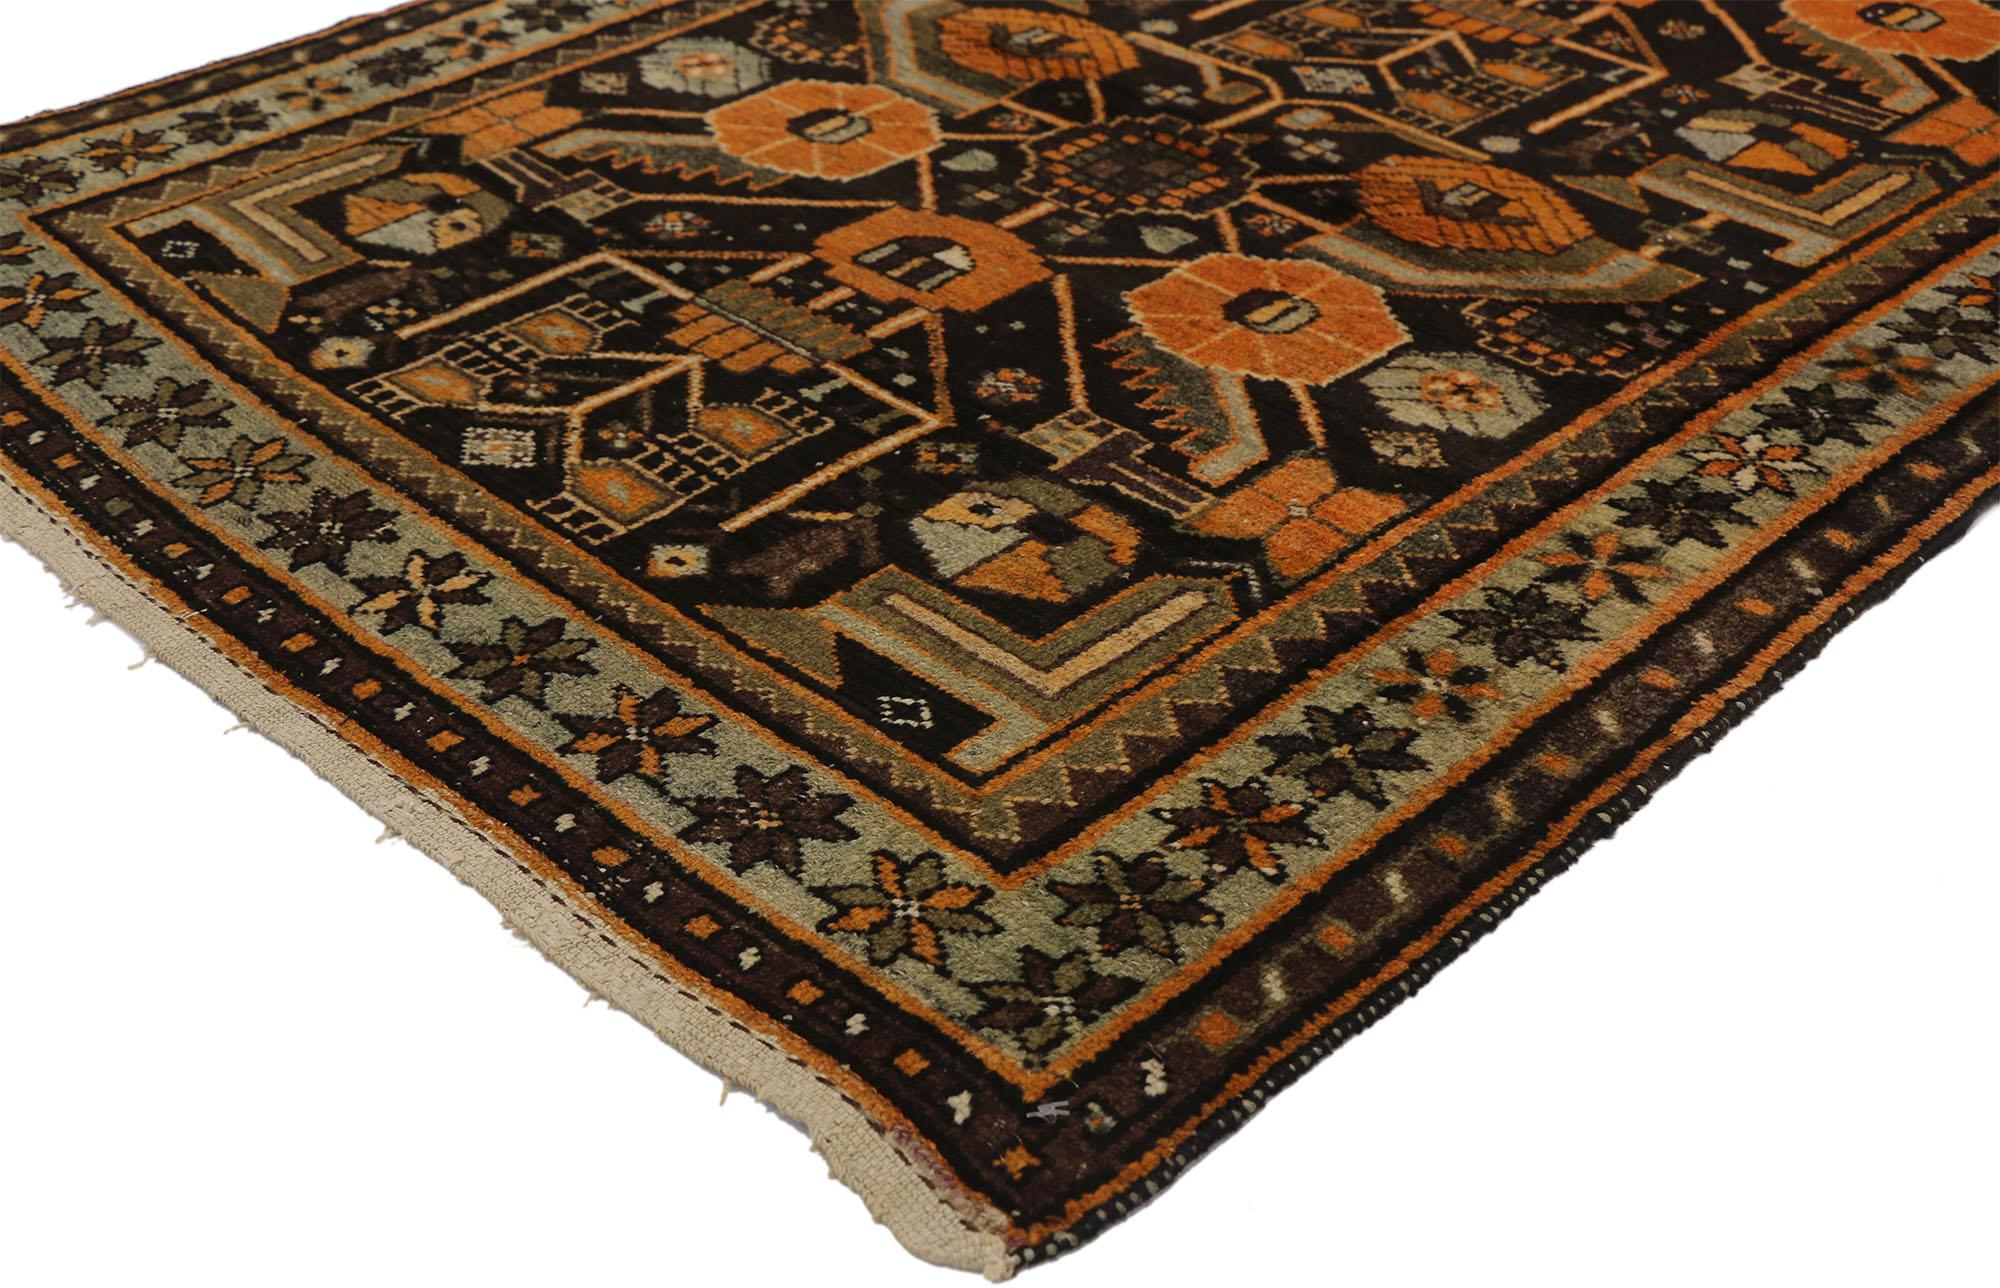 72607 Antique Persian Hamadan Rug with Mid-Century Modern Style 03'07 x 04'05. Full of tiny details and a bold expressive design combined with lively colors and MCM style, this hand-knotted wool antique Persian Hamadan rug is a captivating vision of